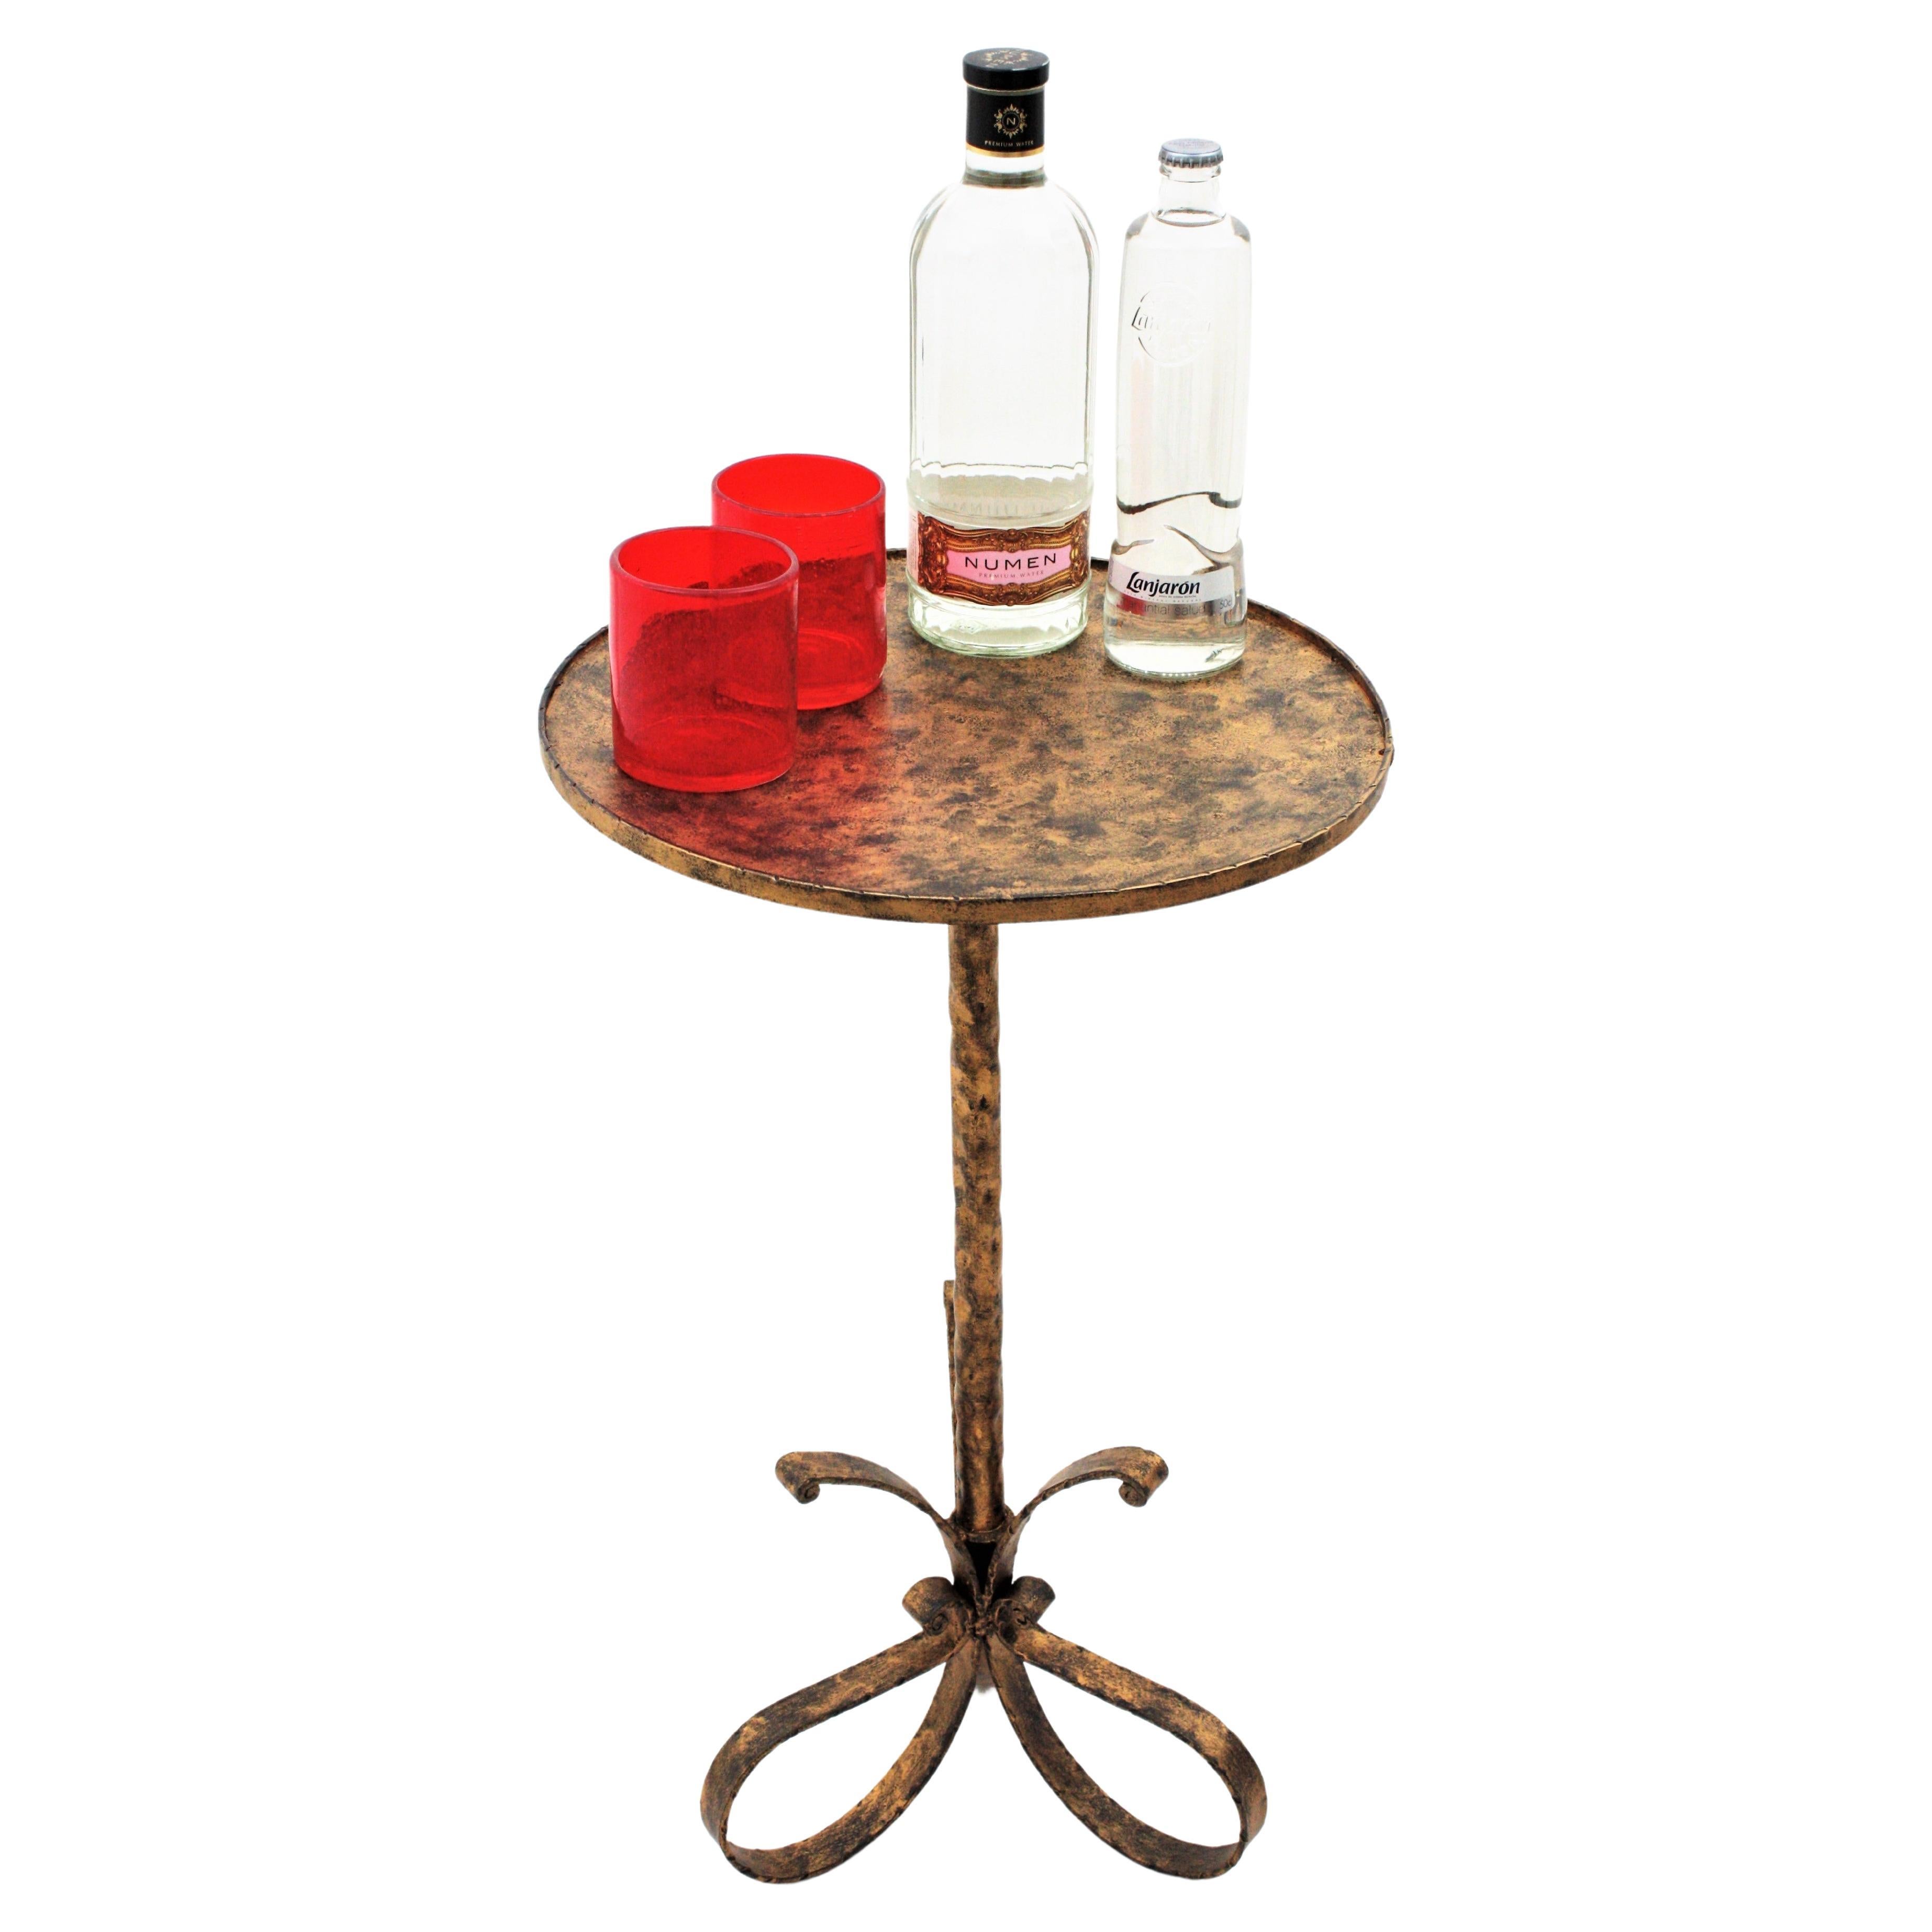 Lovely hand-hammered gilt patinated occasional table or martini table with three-footed looped base, Spain, 1940-1950s.
The top is large enough to be used as a coffee table and stands up on a loop shaped iron base adorned with scroll endings.
Use it